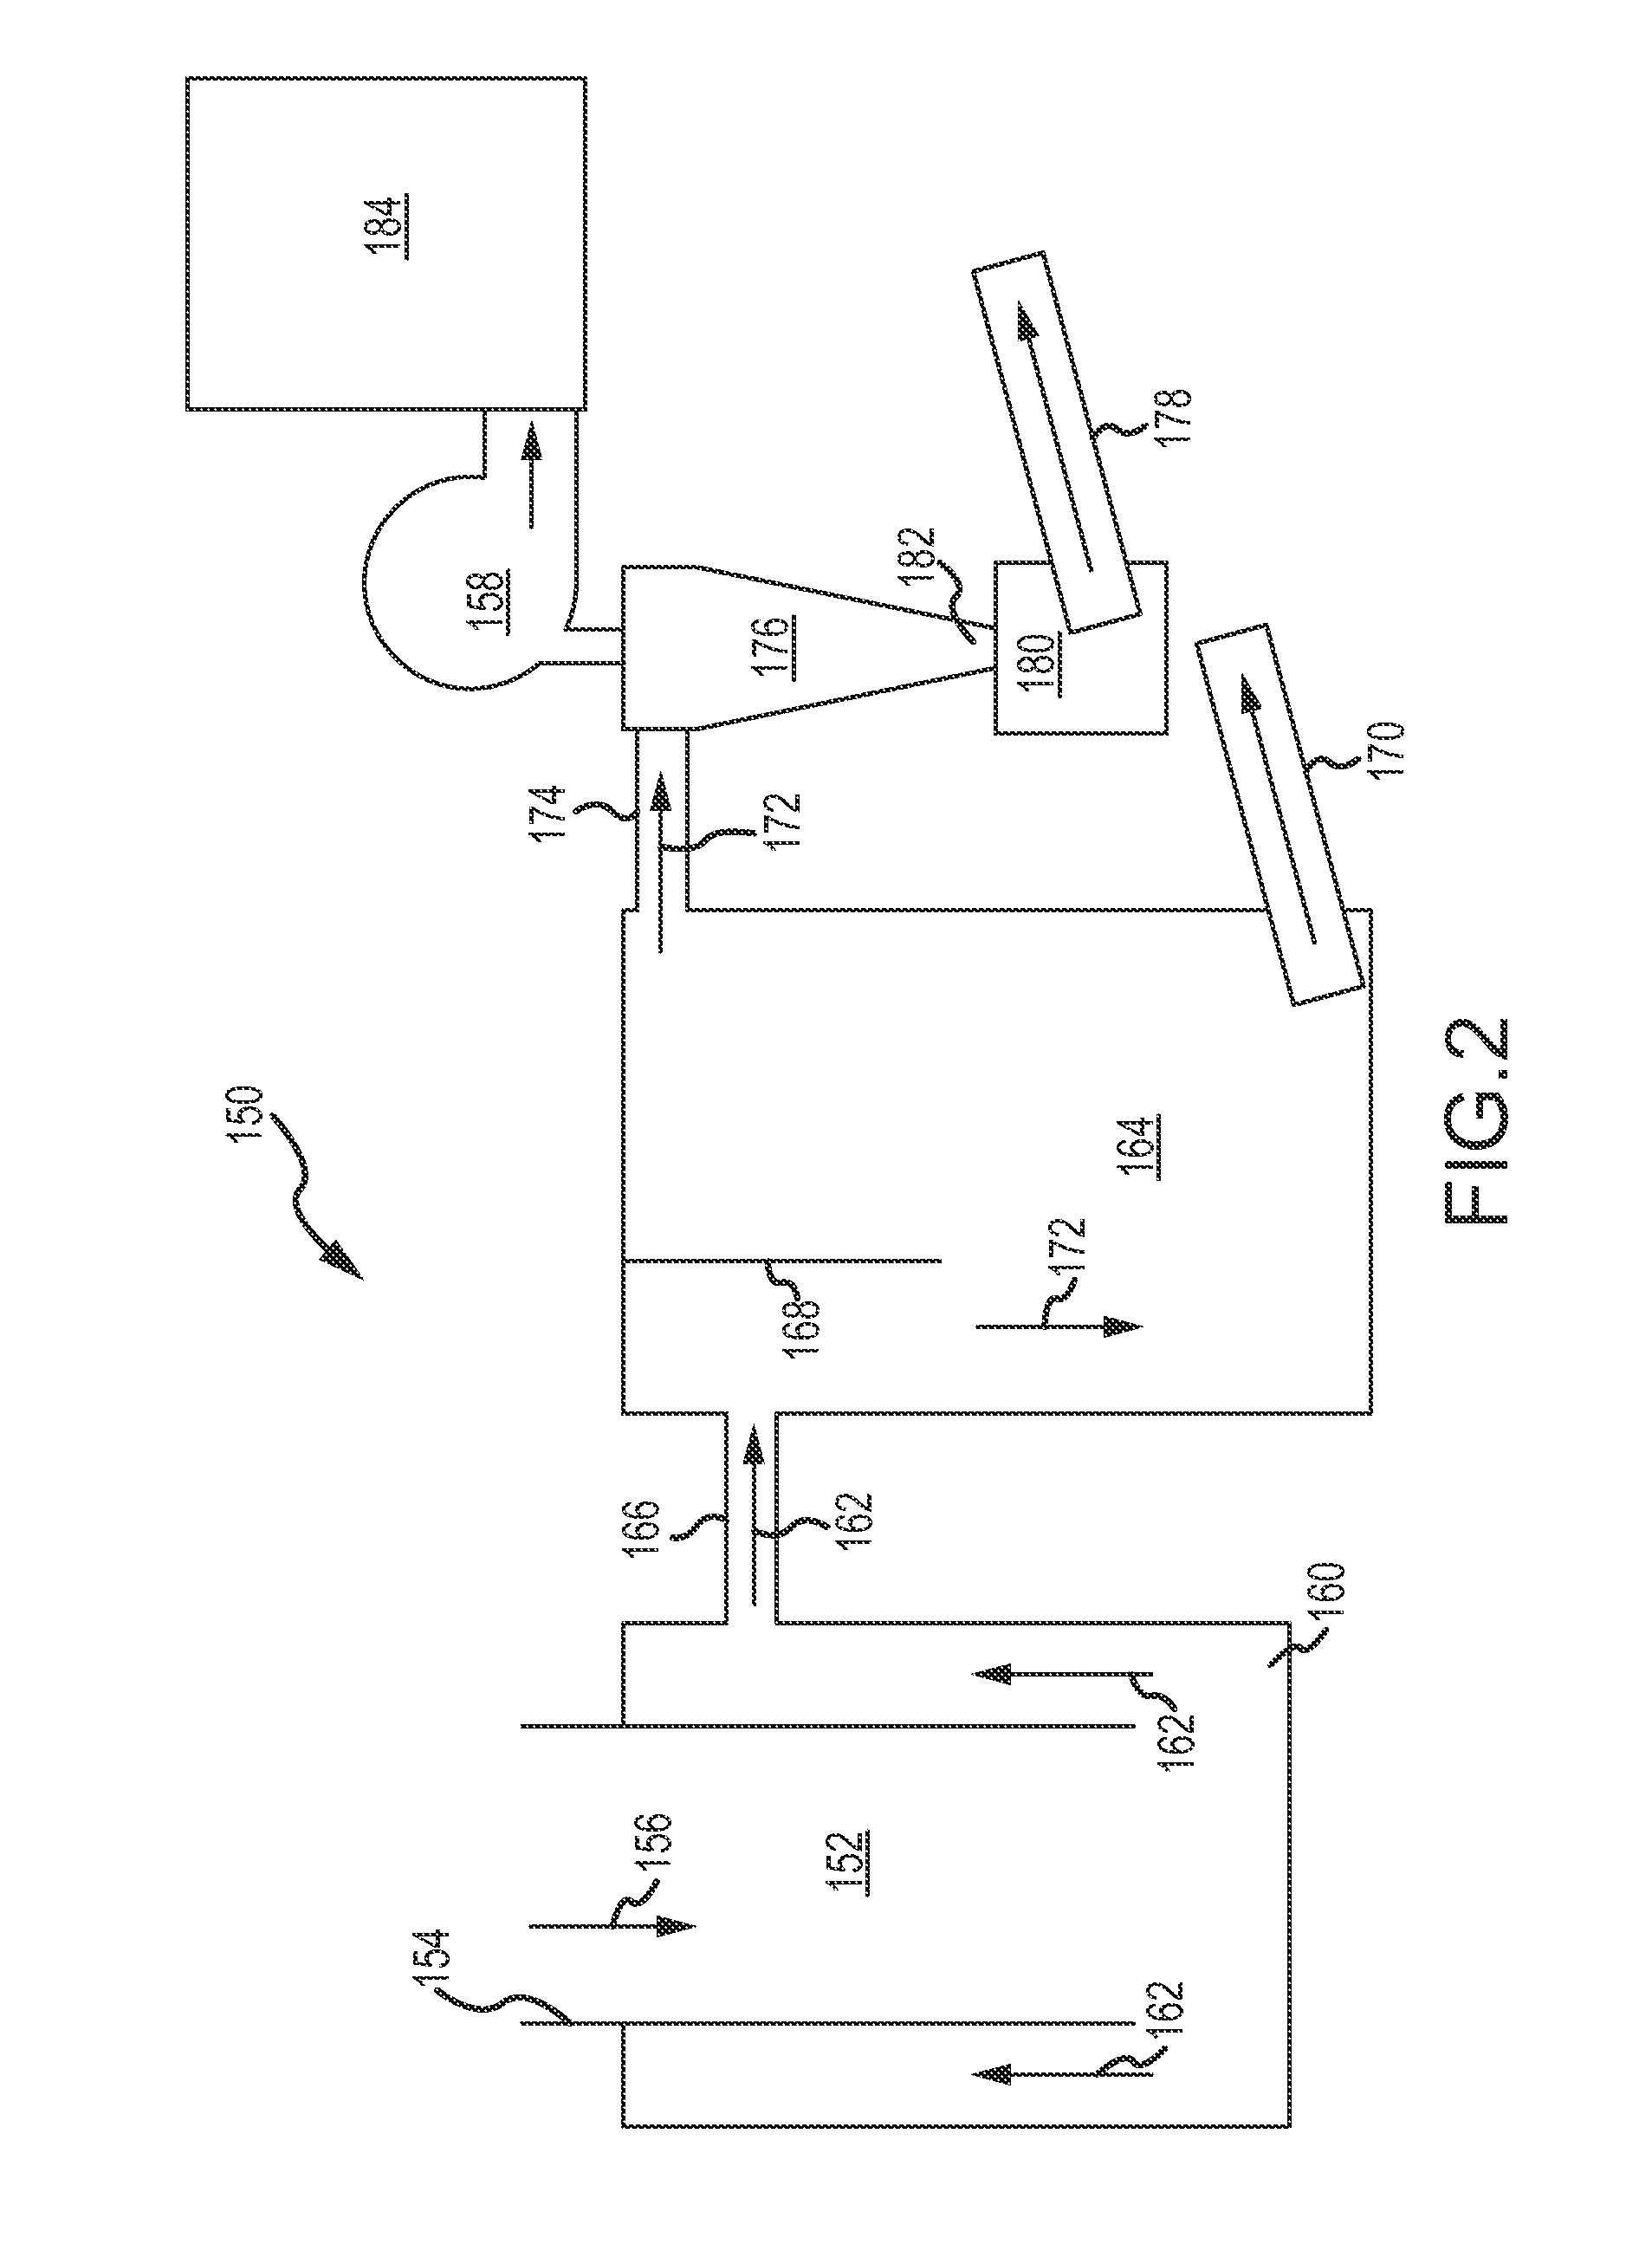 Method and Apparatus For Continuous Production of Carbonaceous Pyrolysis By-Products